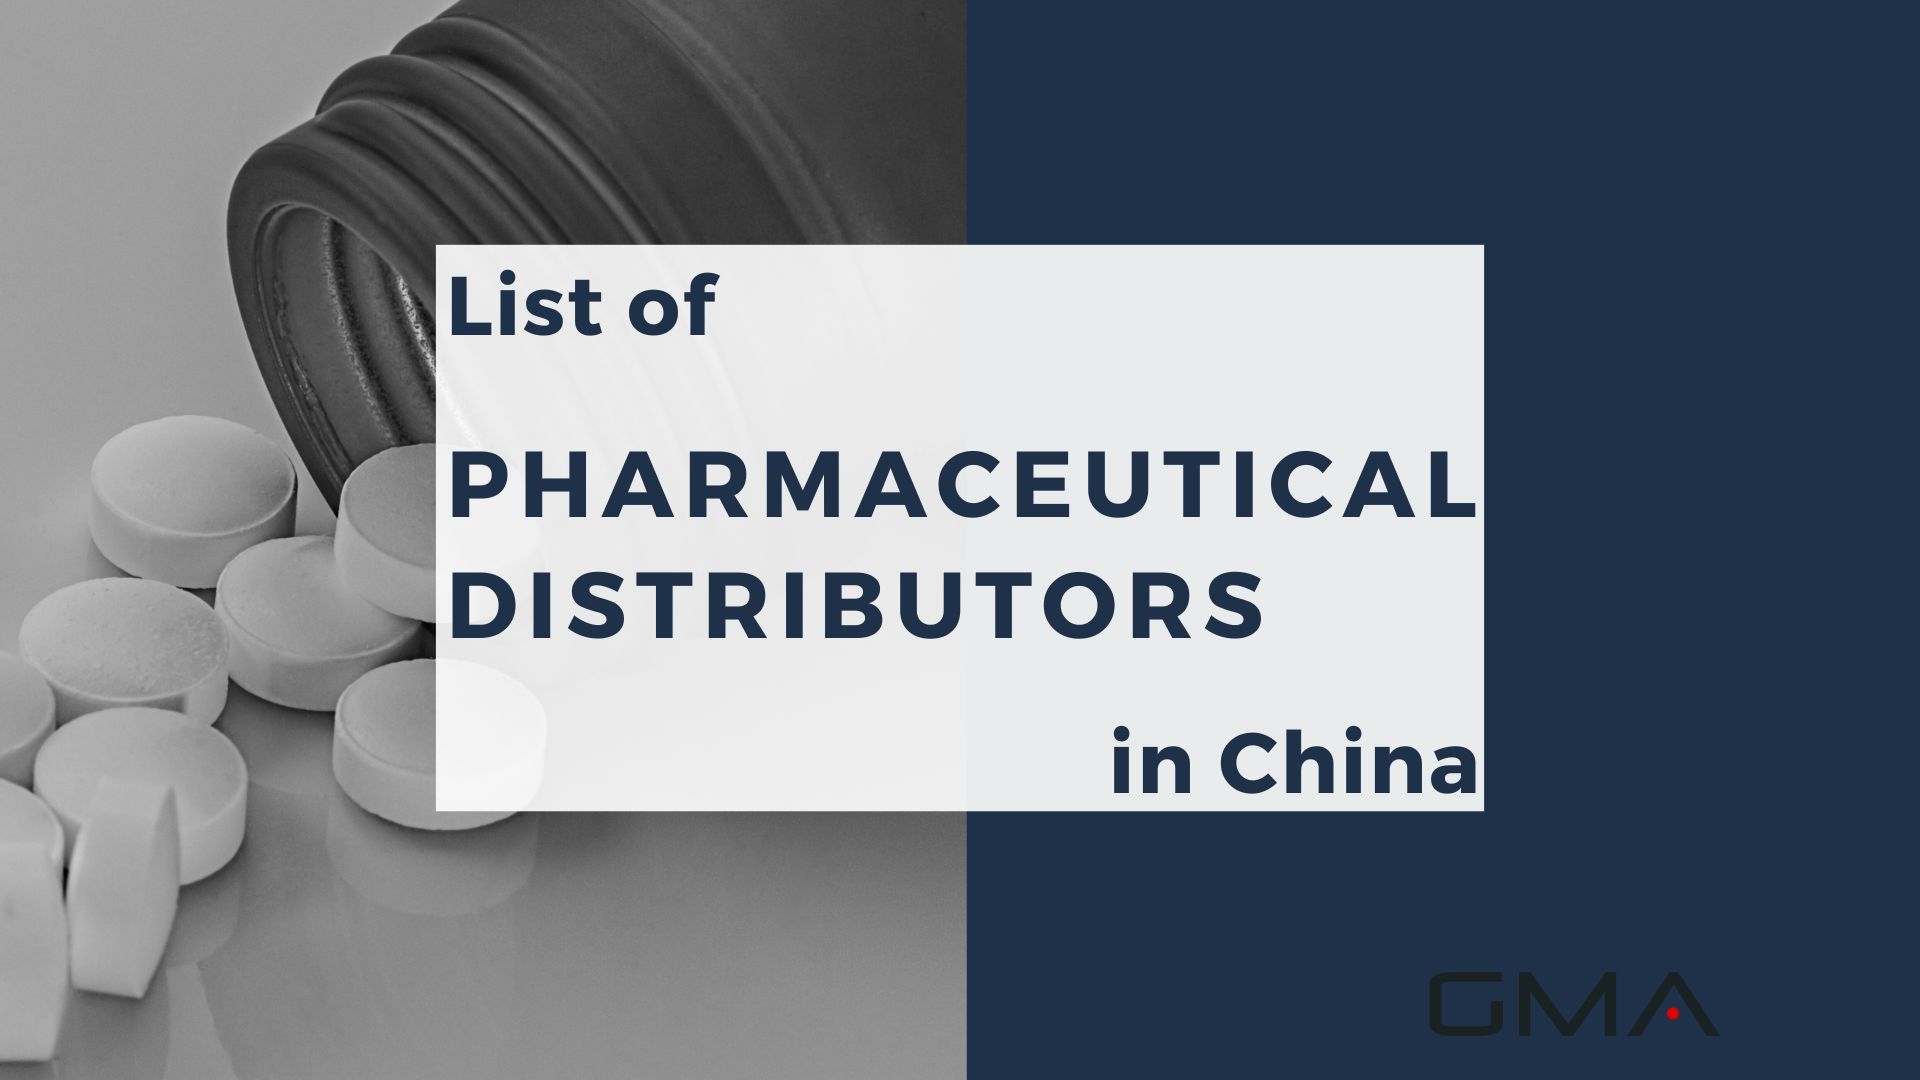 List of Pharmaceutical Distributors in China